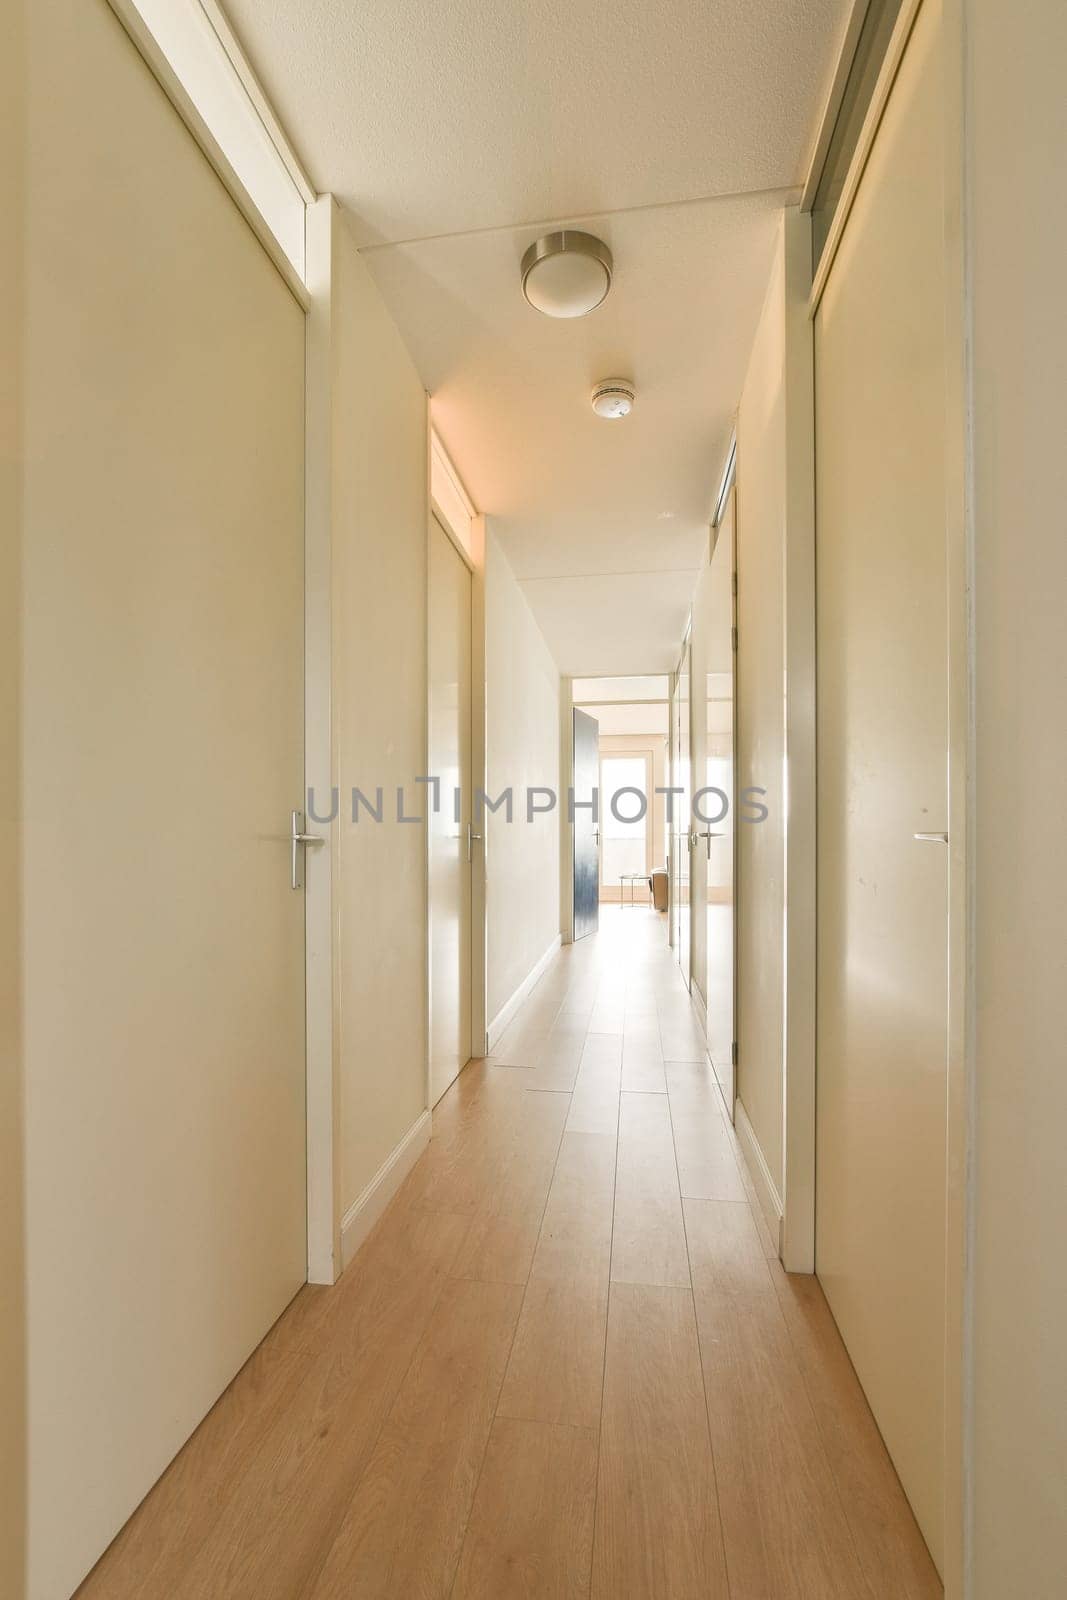 a long hallway with white walls and wood flooring on both sides, leading to an open door that leads to another room